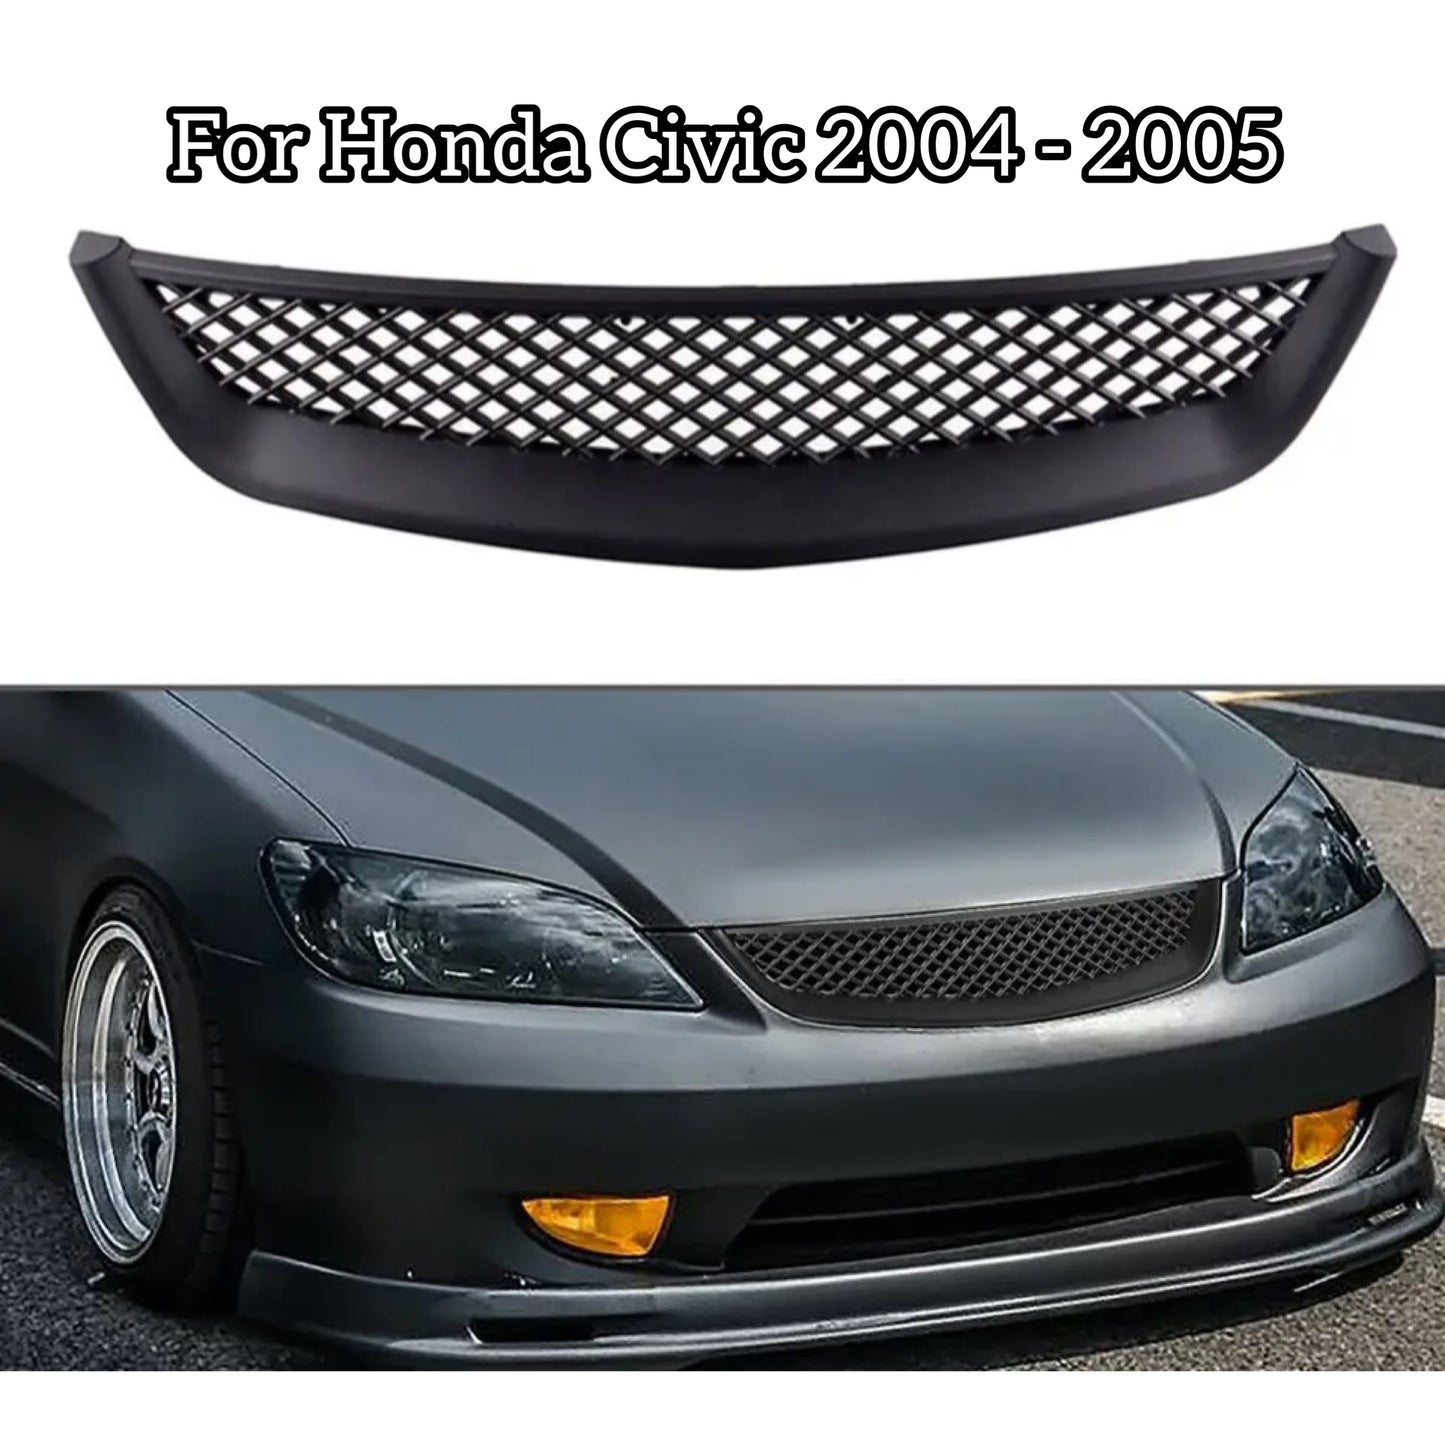 Honda Civic 2005 Abs Plastic Mesh Front Grill